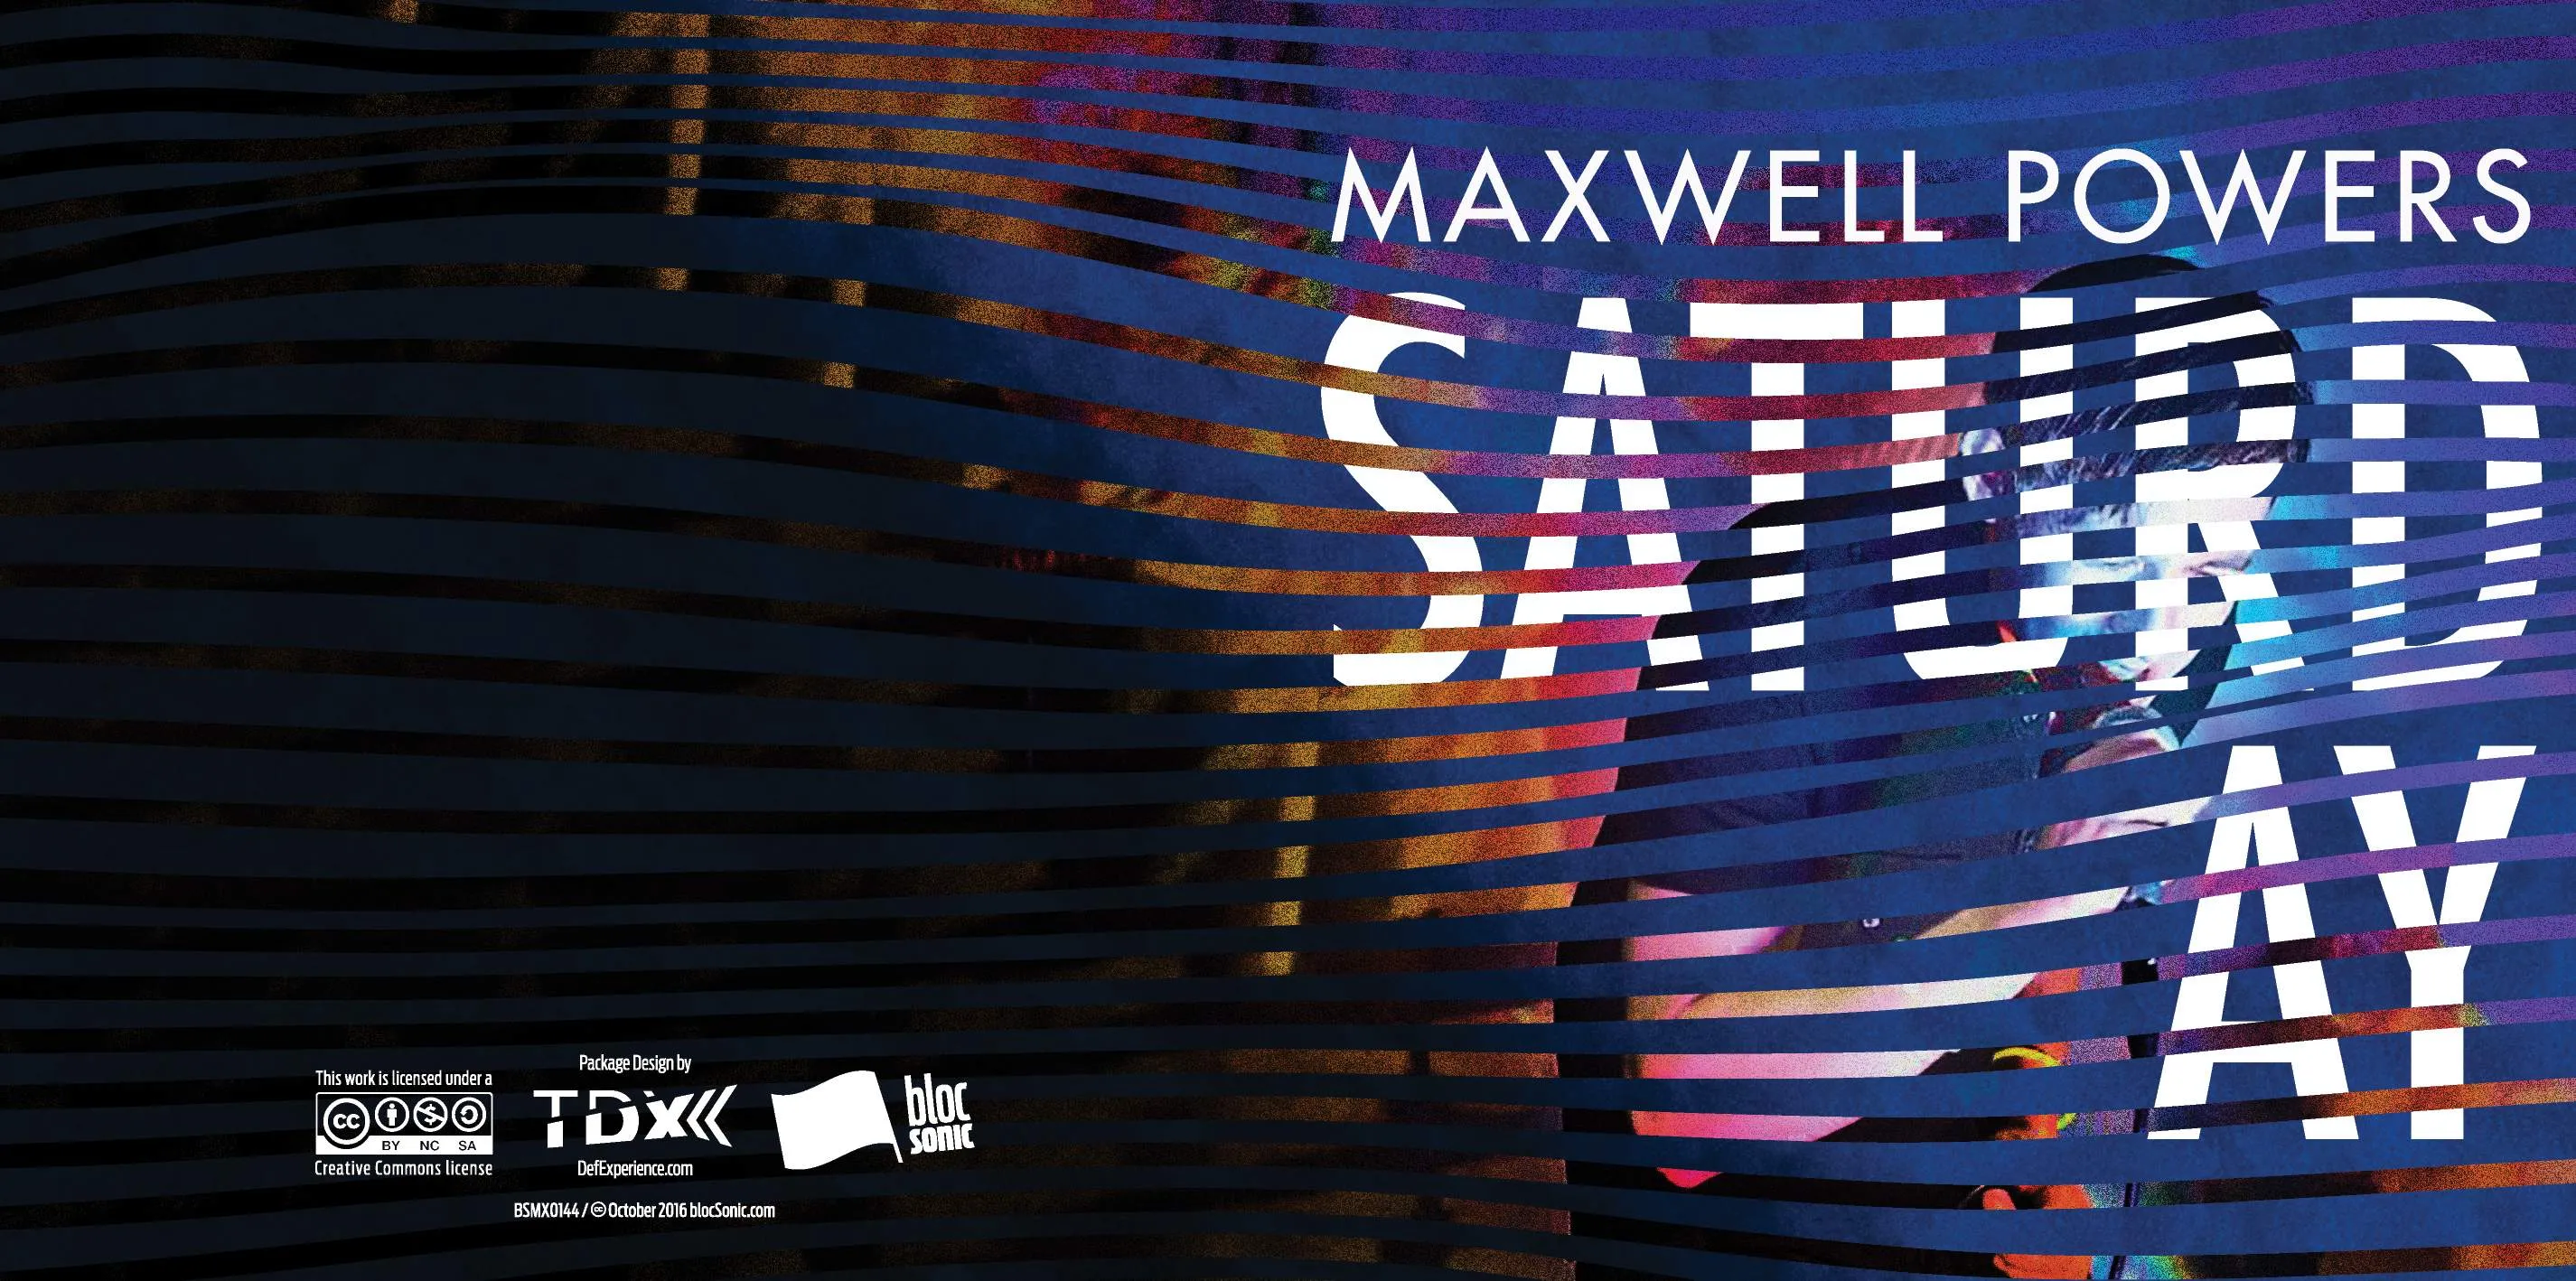 Album insert for “Saturday” by Maxwell Powers